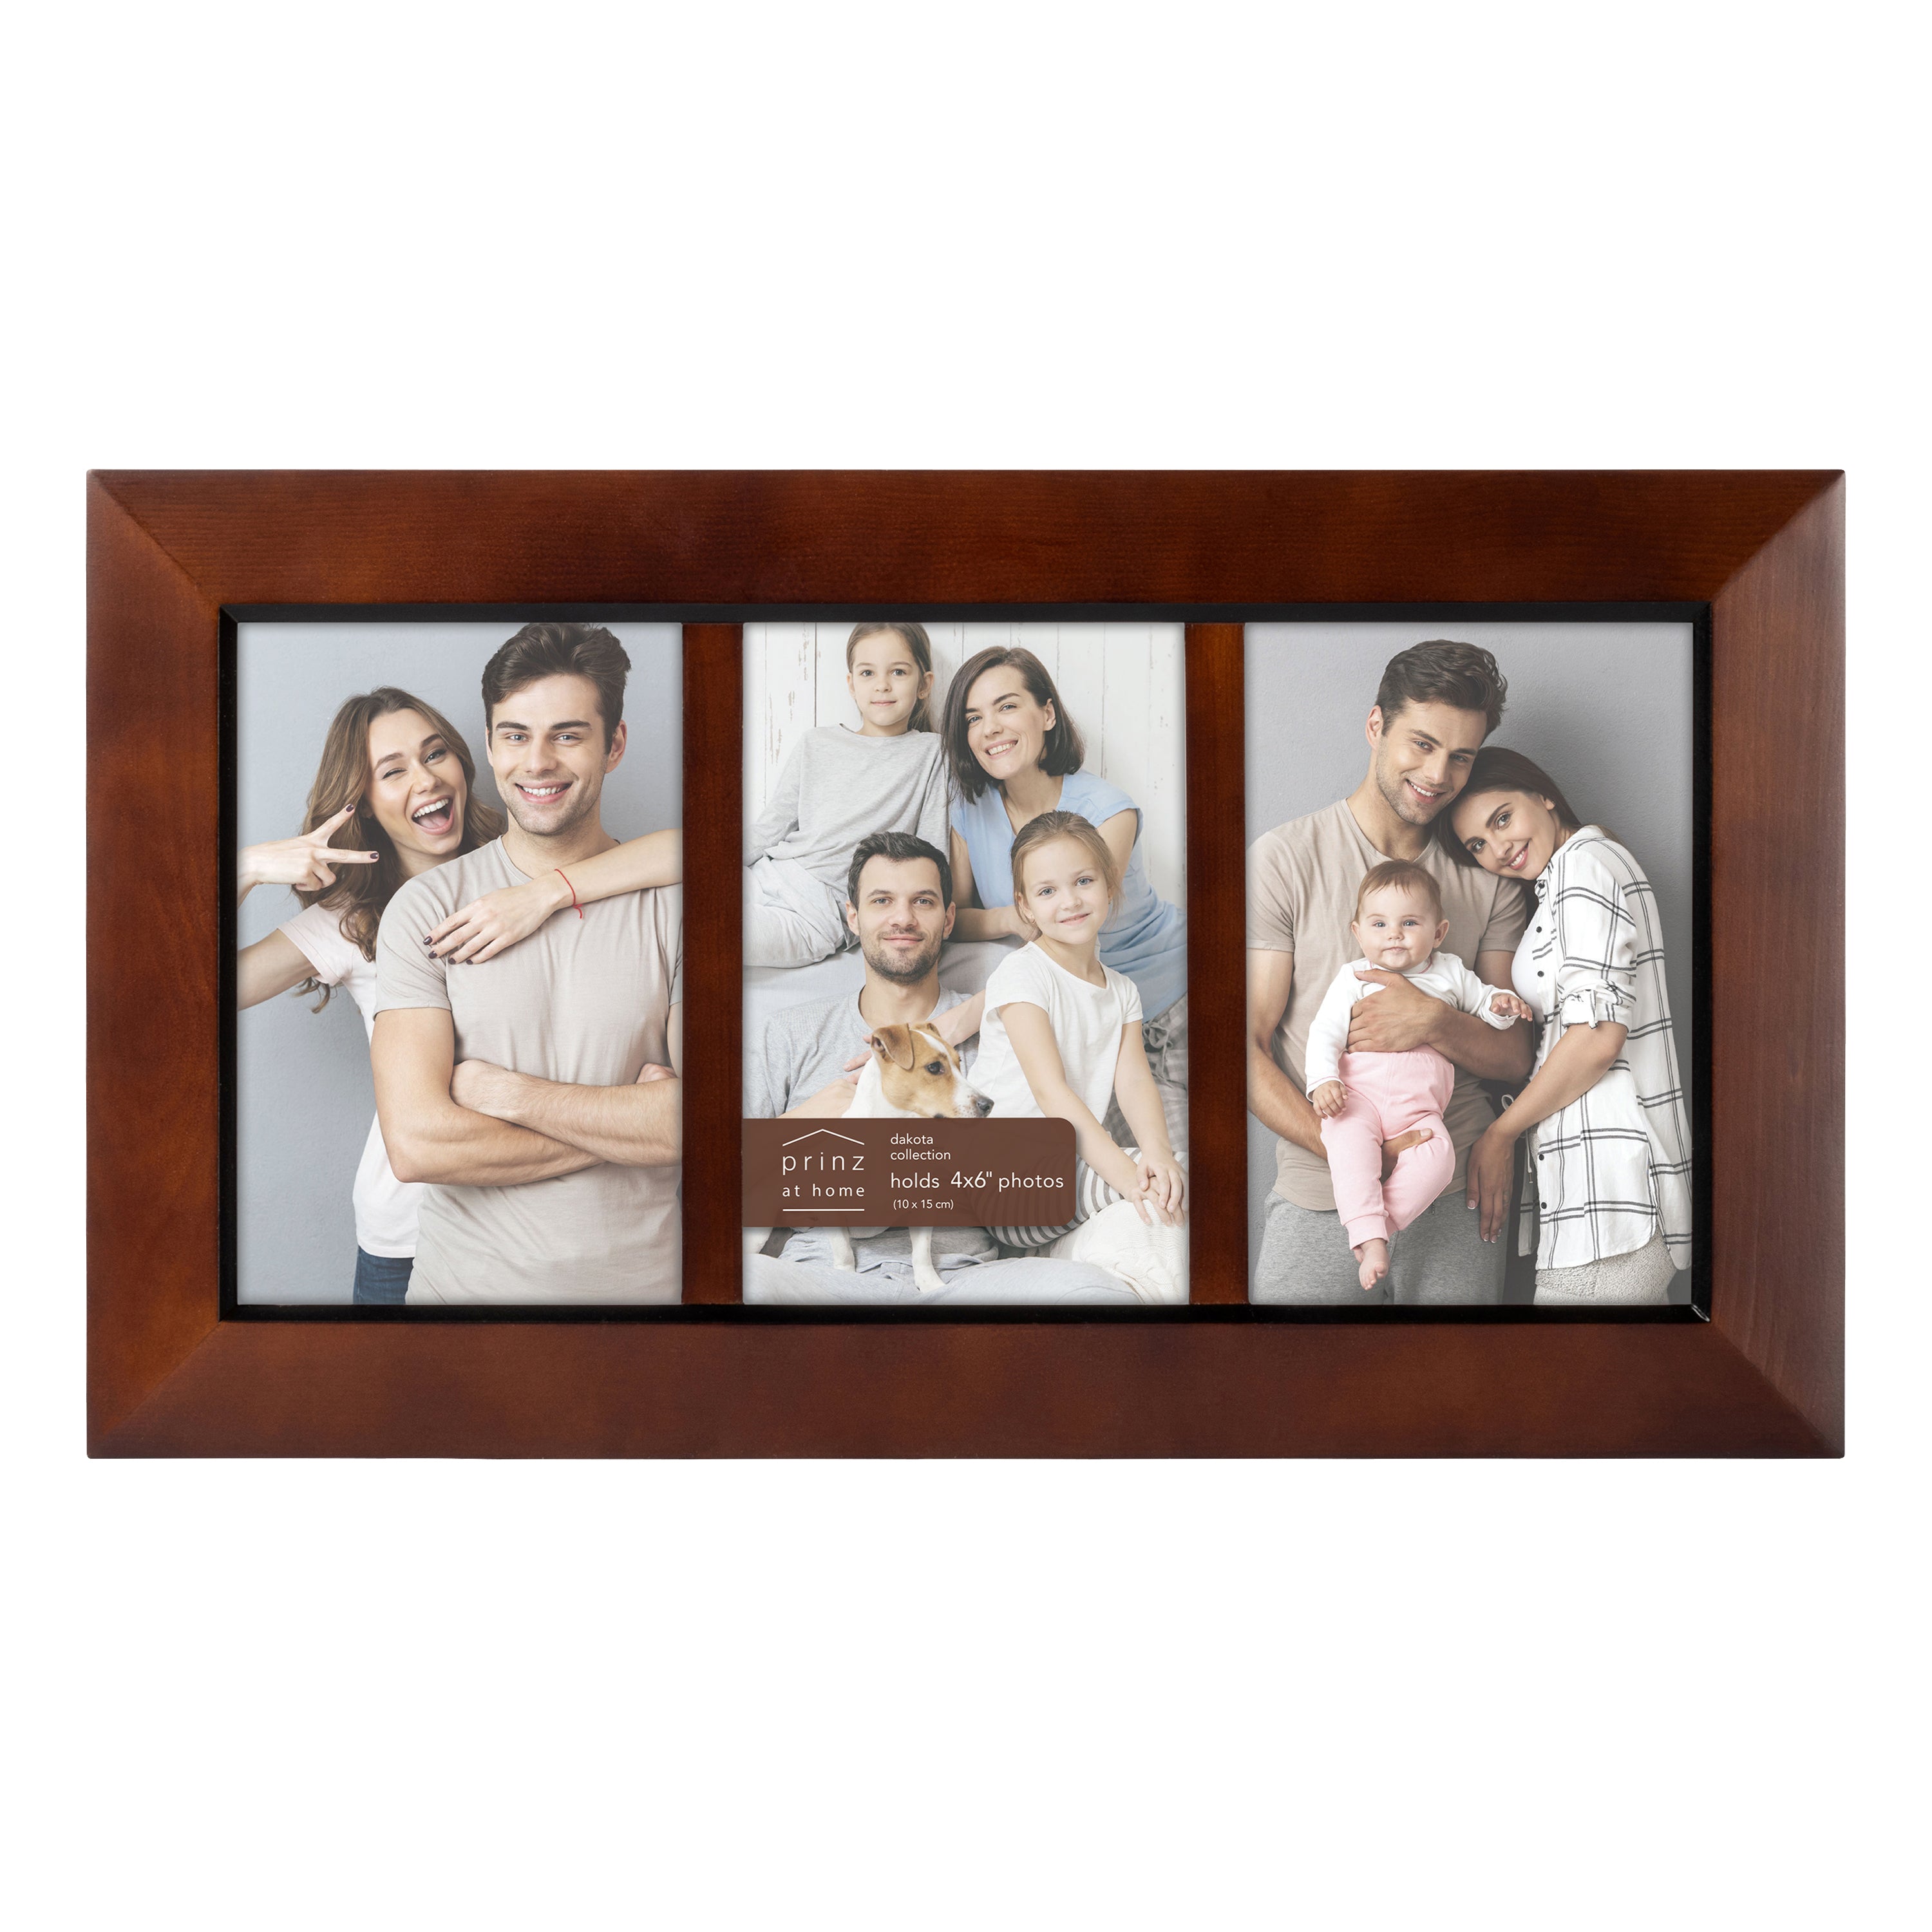 New View Dakota 5x7 Black Linear Picture Frame, Set of 4, Matted